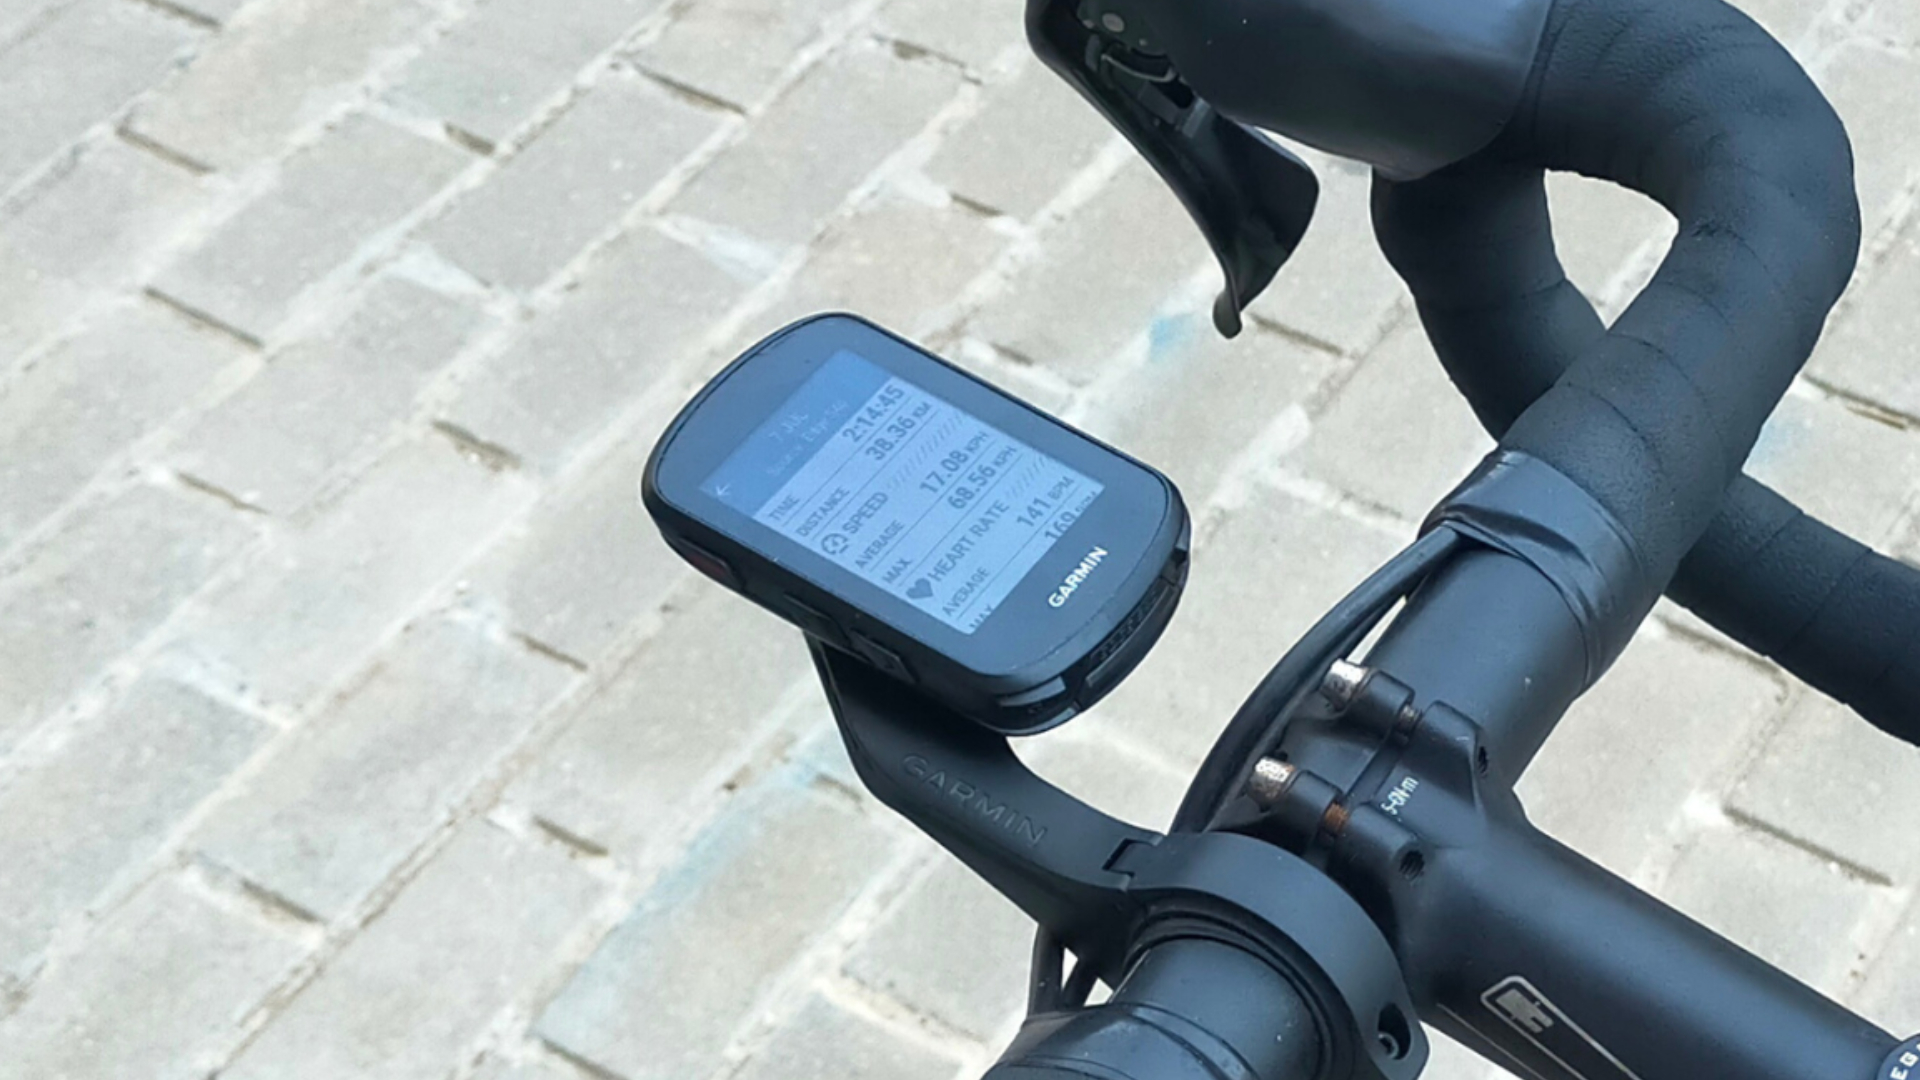 Garmin Edge 840 Series In-Depth Review: 21+ Things To Know! 